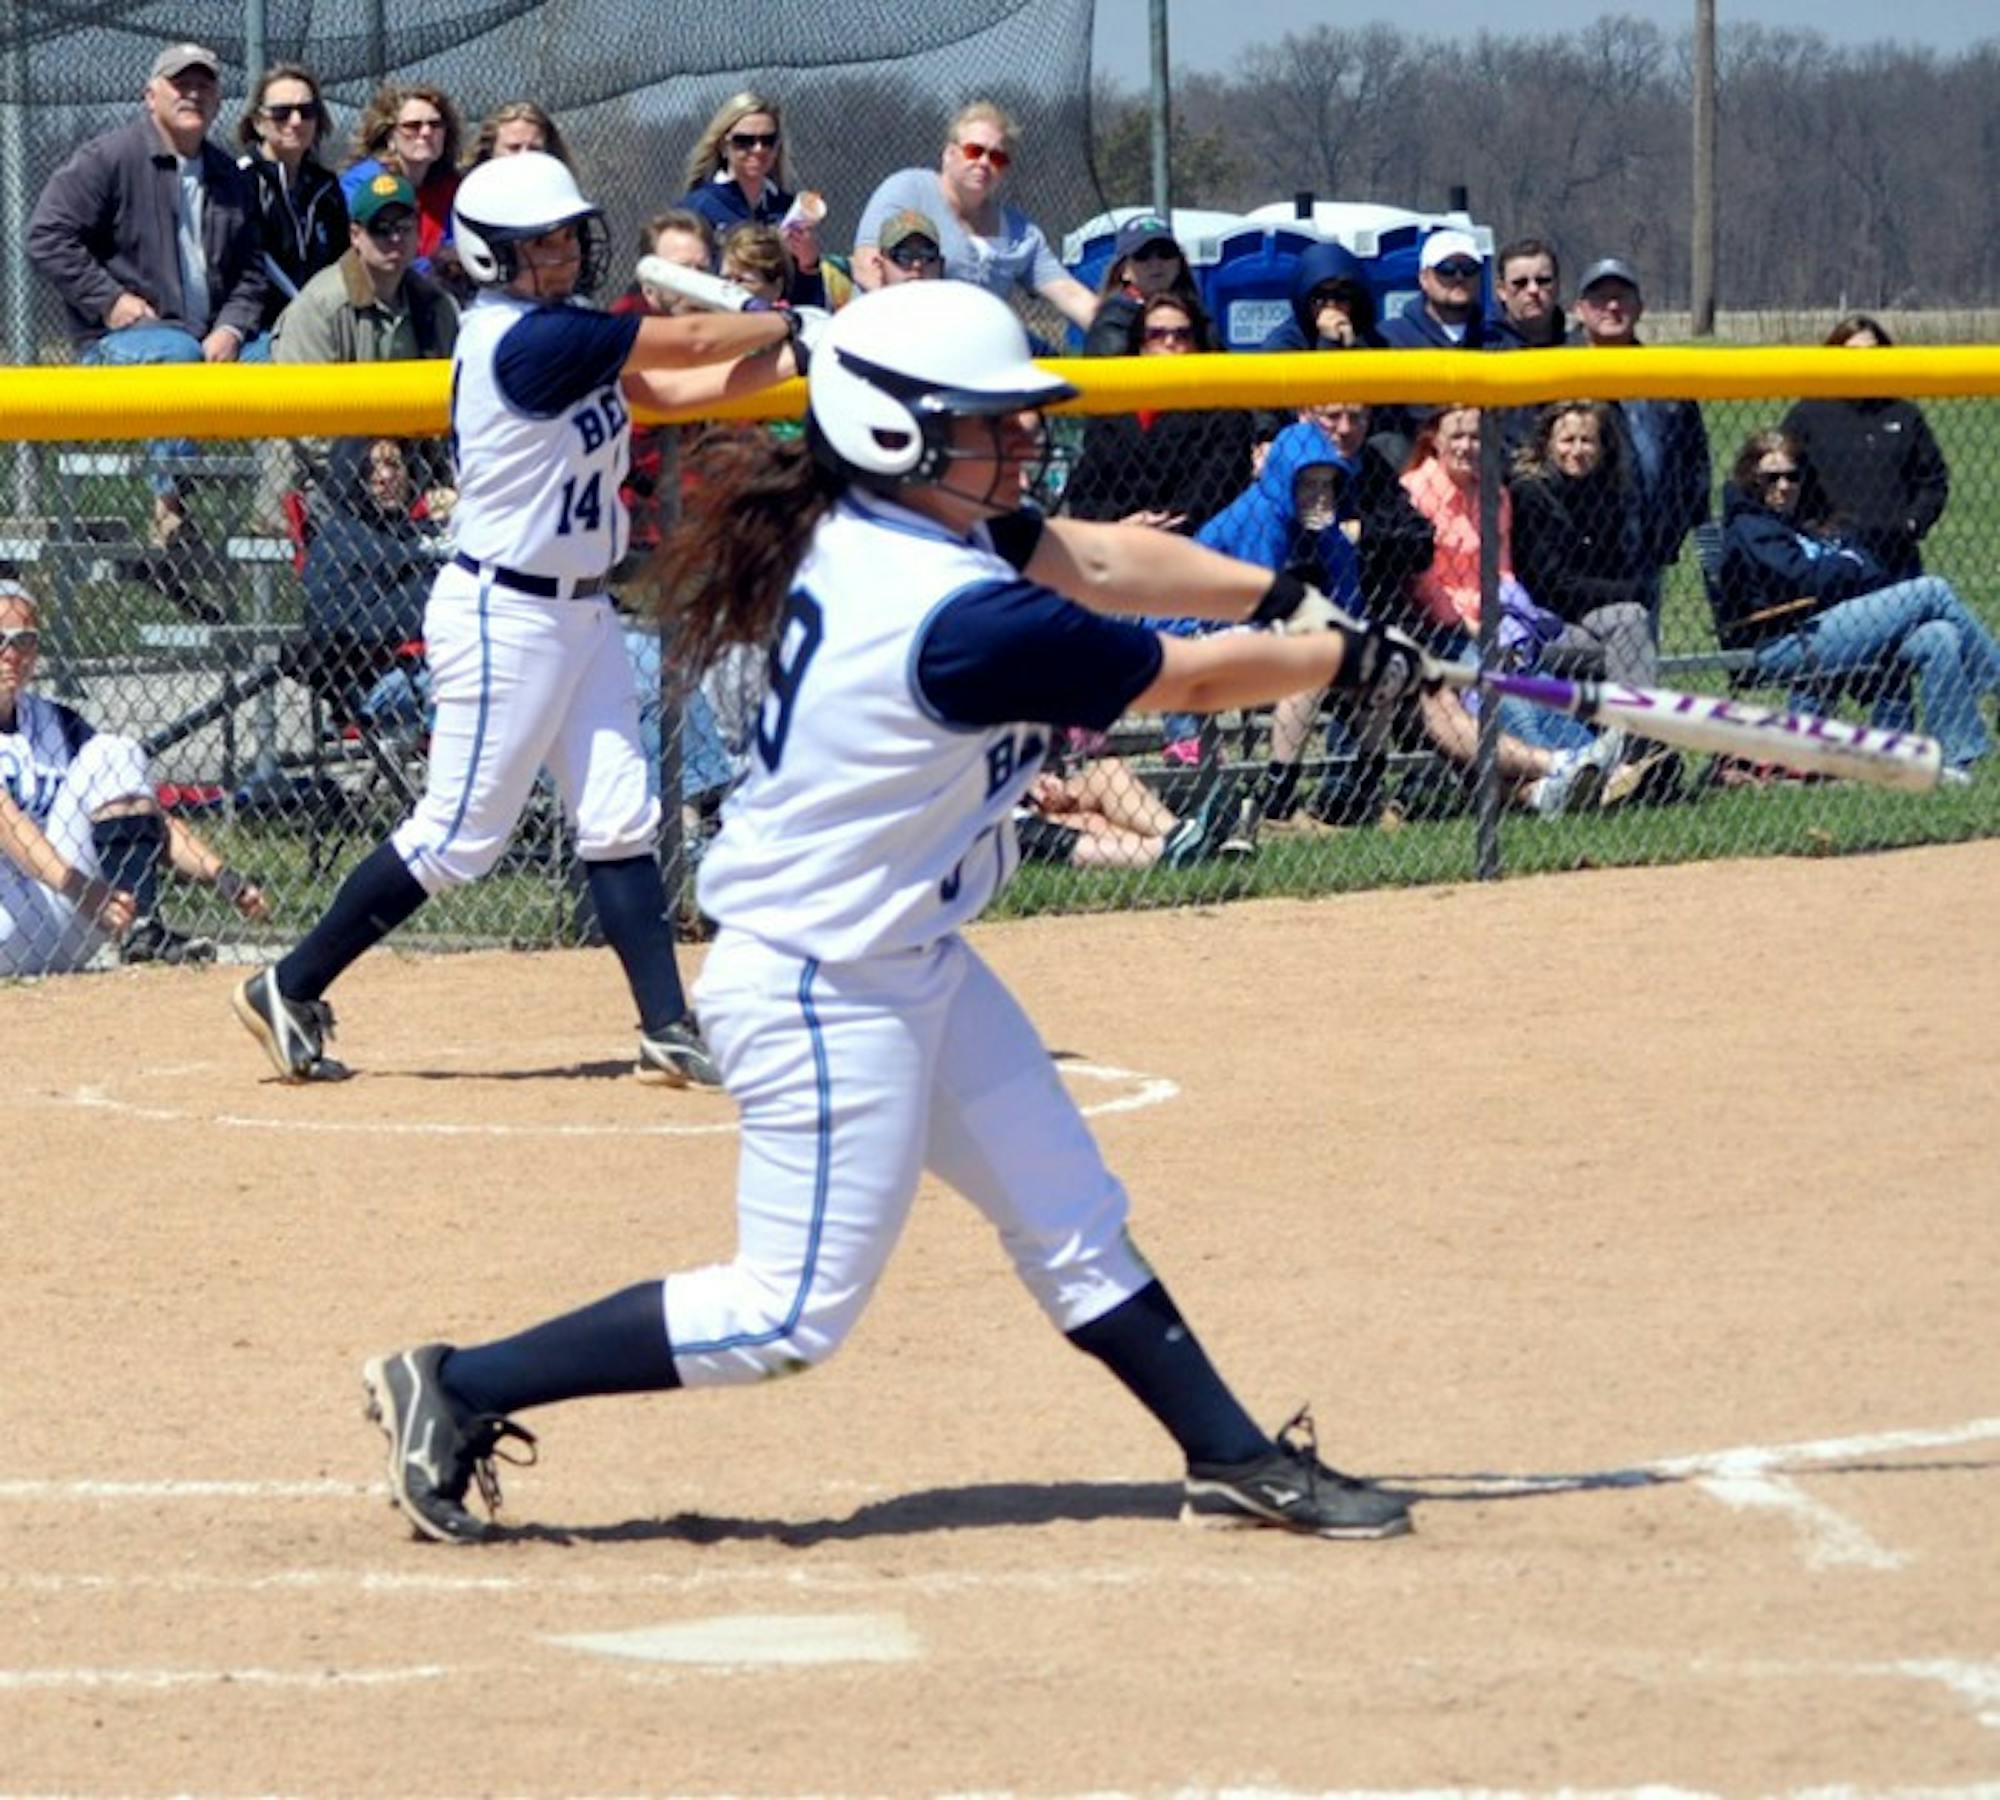 Saint Mary's sophomore outfielder Sarah Callis swings at a pitch during the Belles' 3-2 over Adrian on April 19.